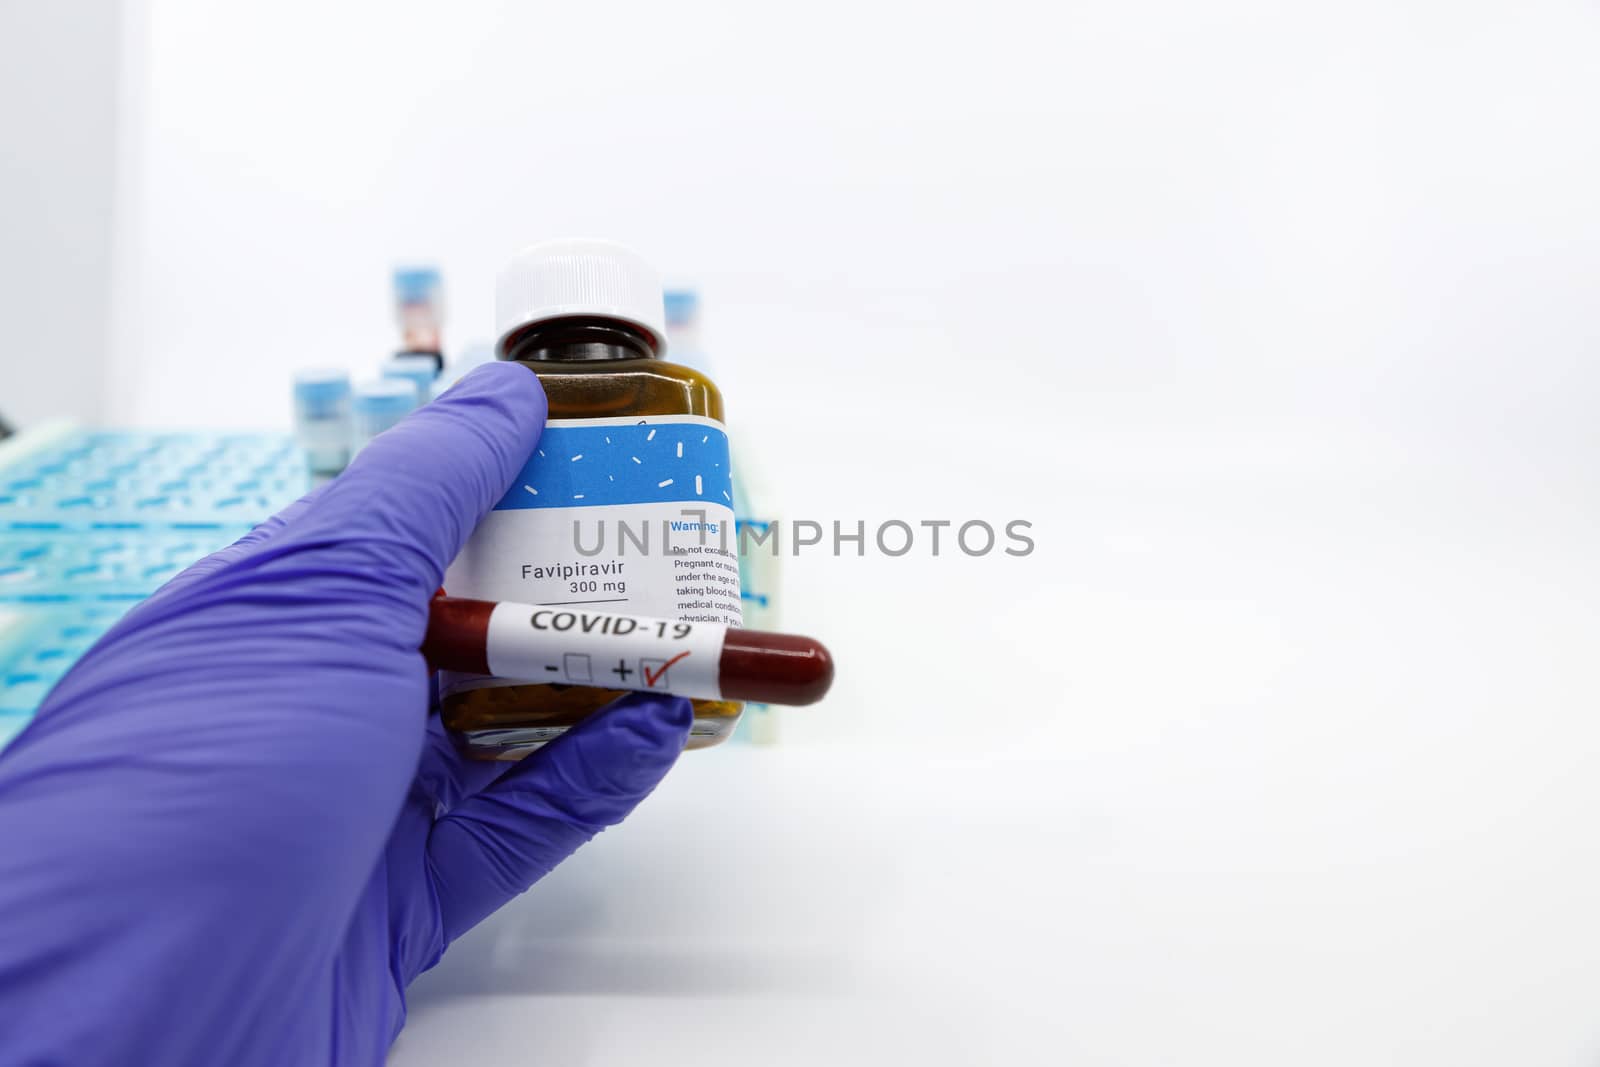 Dubai-UAE-Circa 2020:Doctor showing bottle of medicine with positive covid-19 test.Concept of Favipiravir medicine with blood tests tubes on the background.Cure for coronavirus,COVID-19 treatment. by dugulan